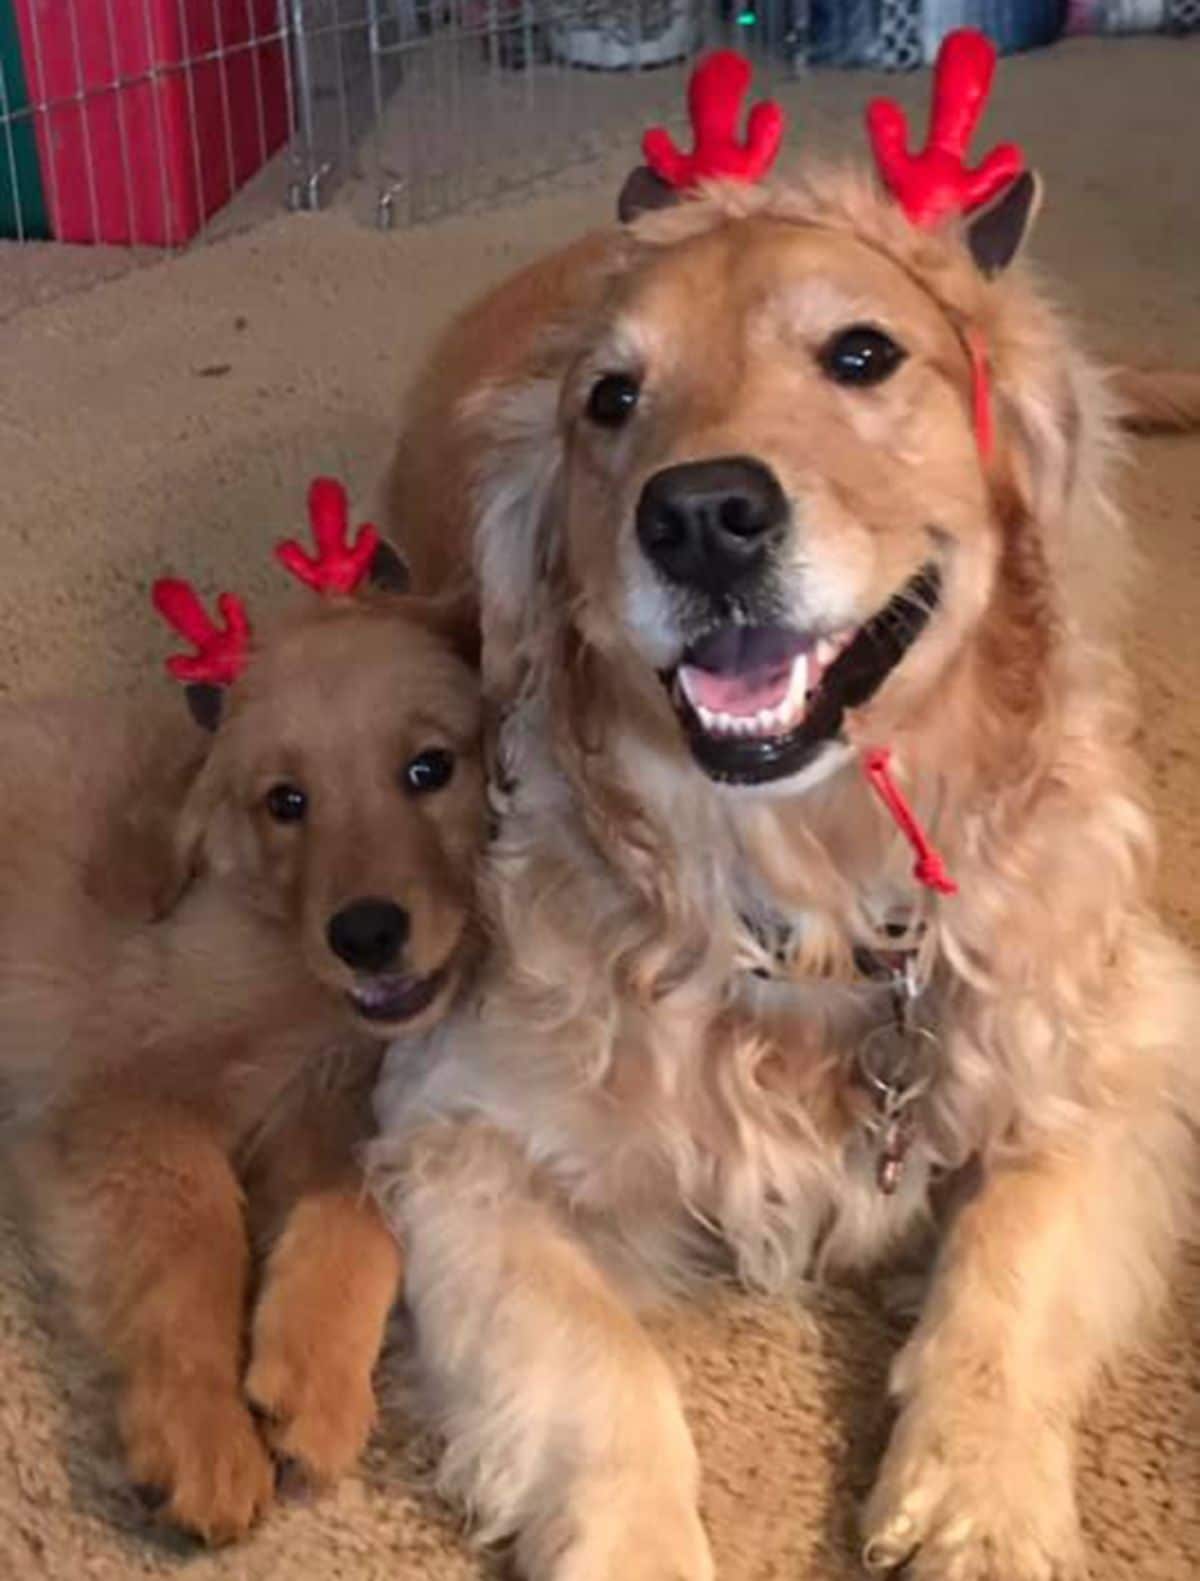 smiling golden retriever wearing red antlers next to a golden retriever puppy wearing red antlers